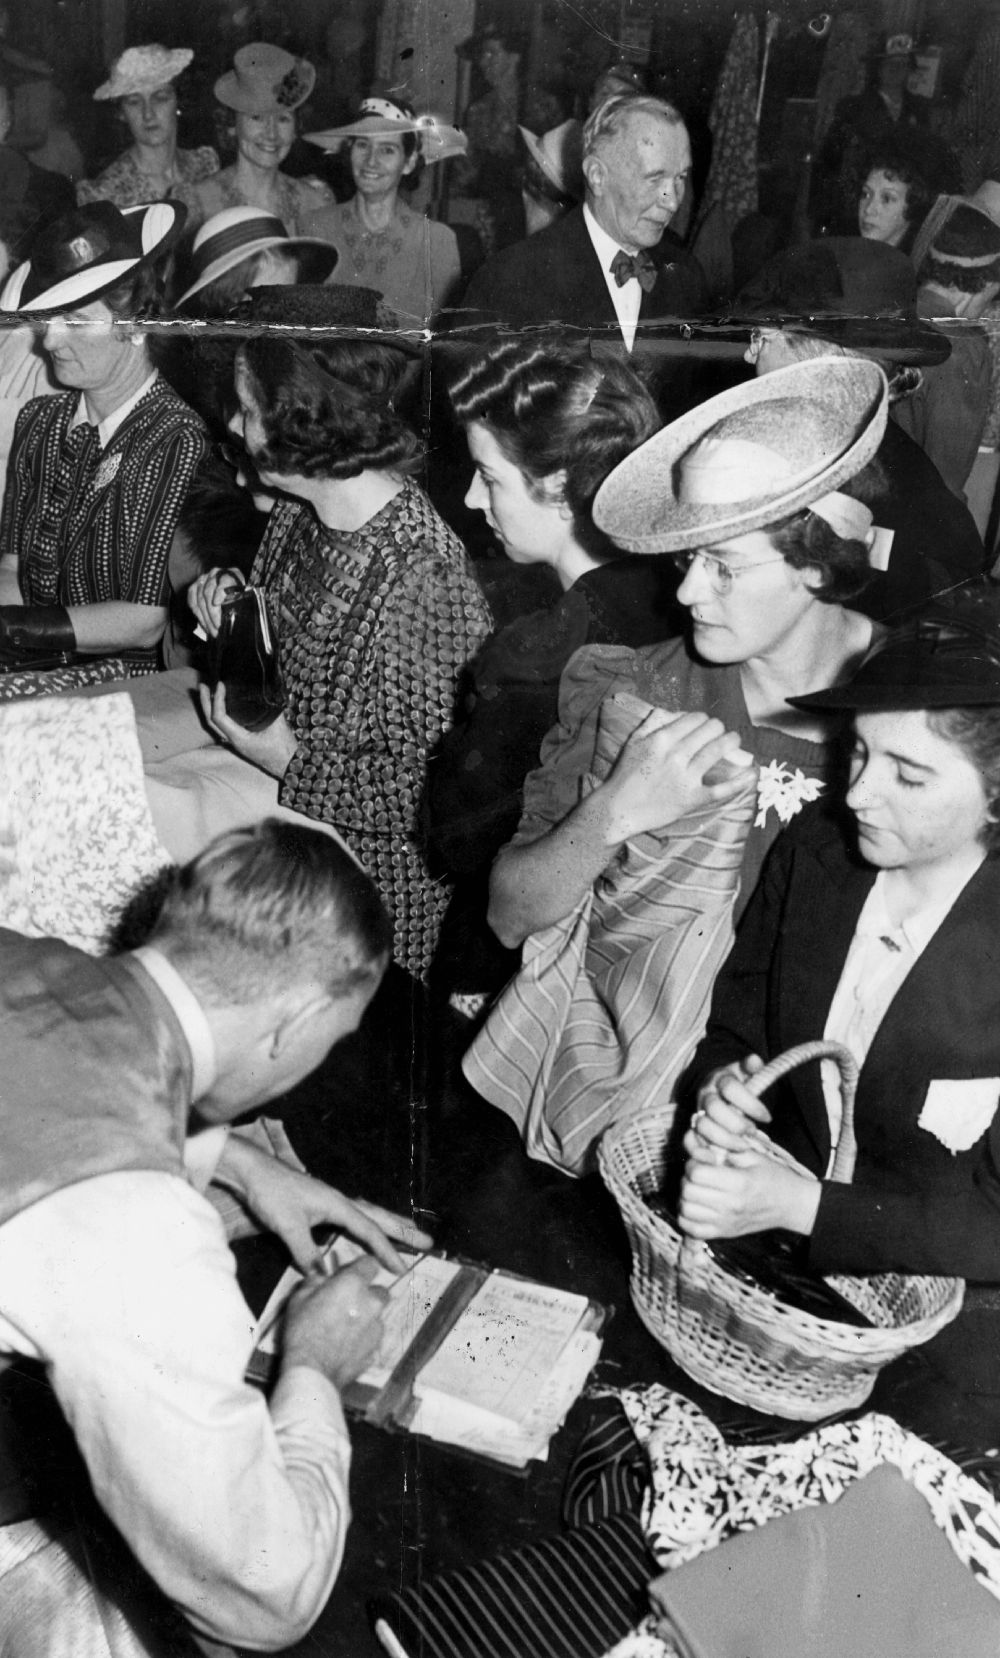 A group of women at a shop counter with a man serving them and writing in a receipt book